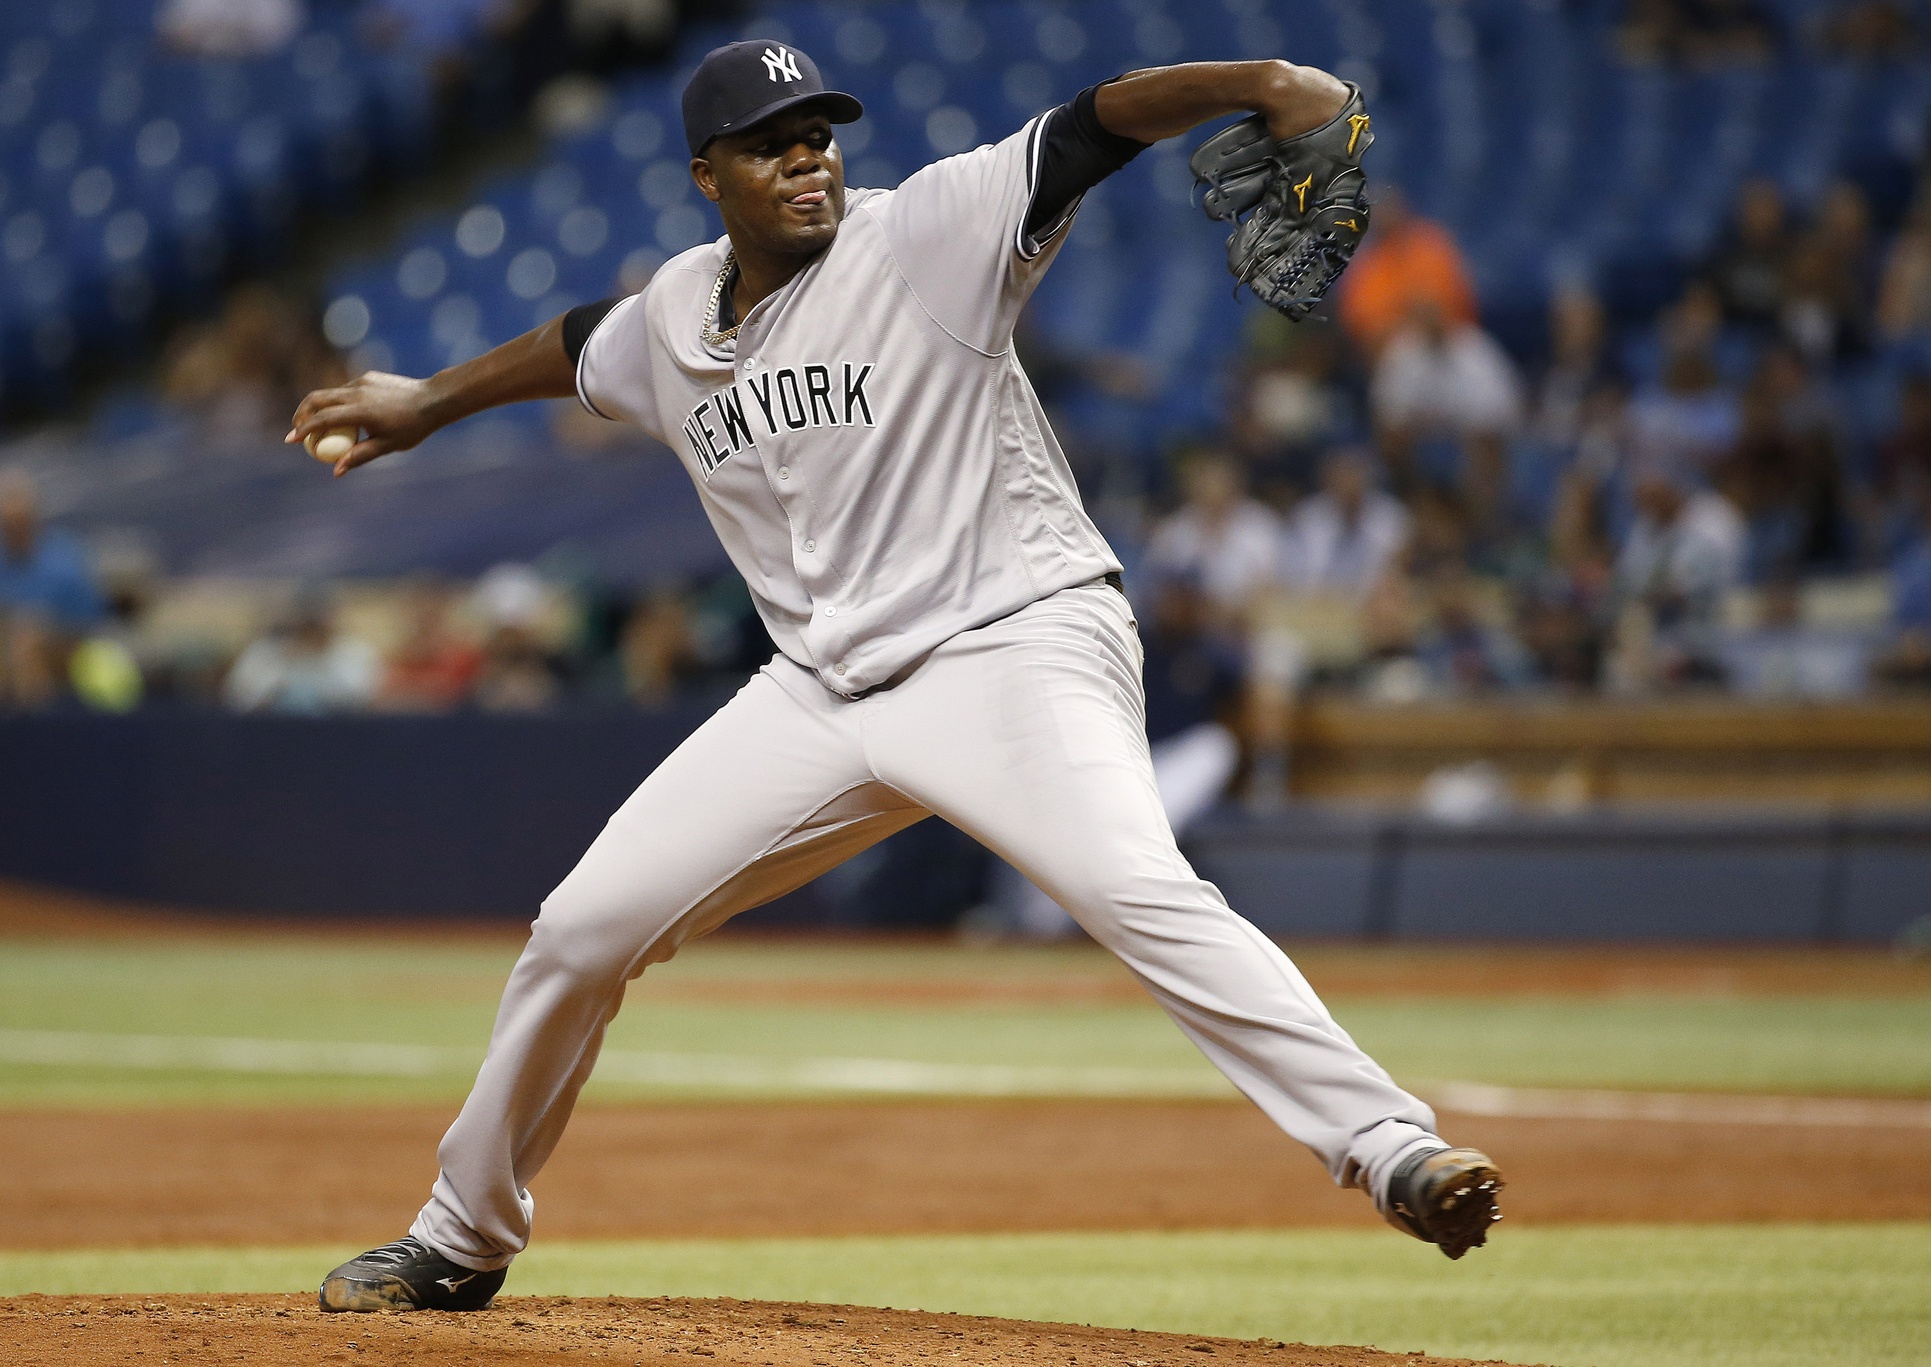 New York Yankees: Now Is The Time To Cut Ties With Michael Pineda 4